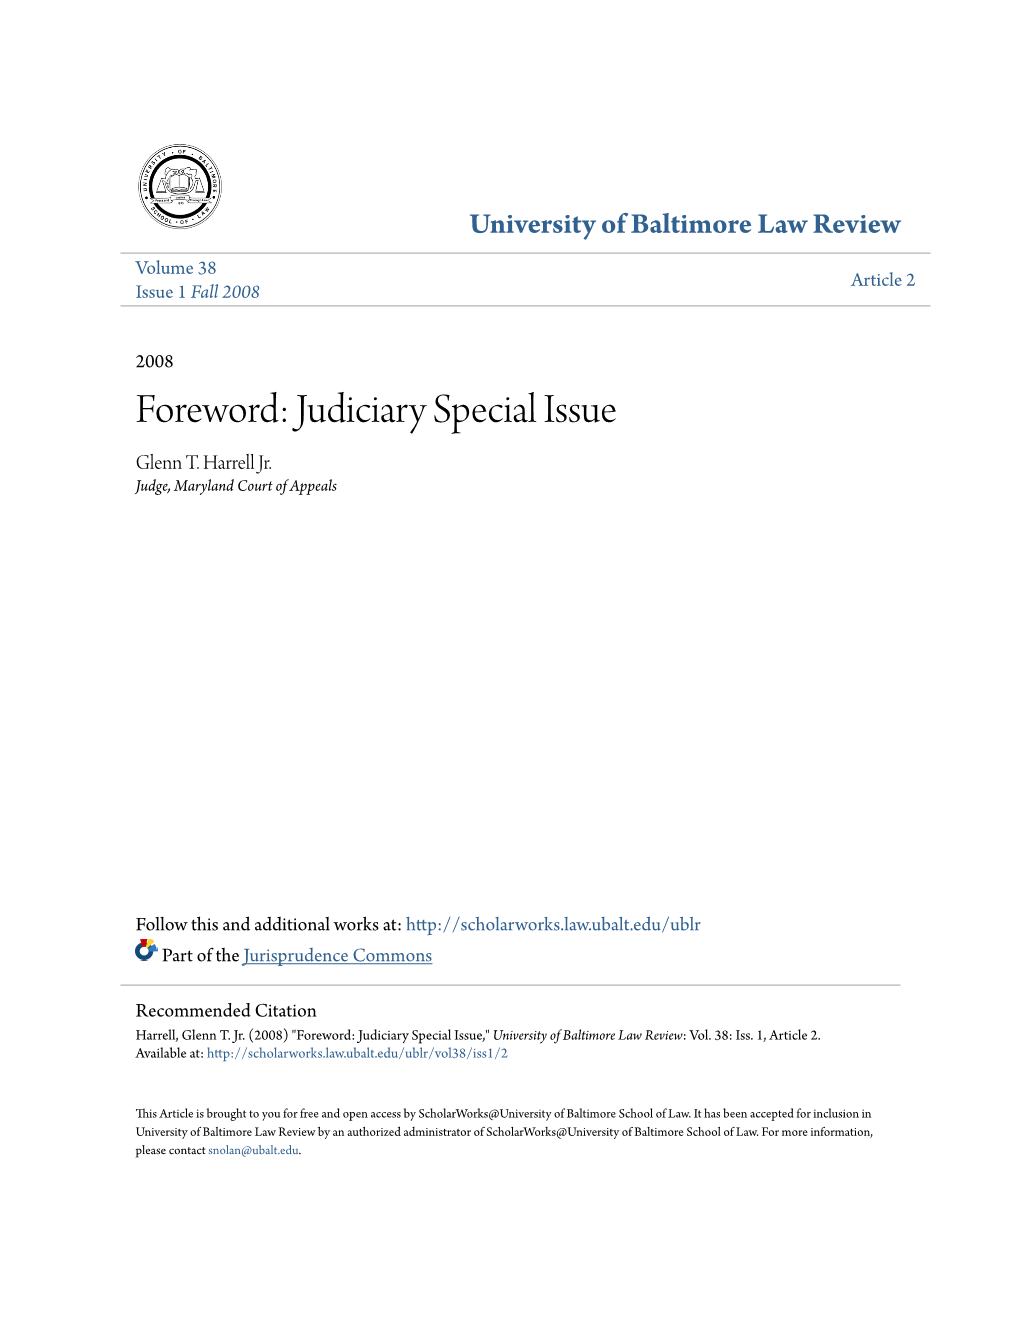 Foreword: Judiciary Special Issue Glenn T